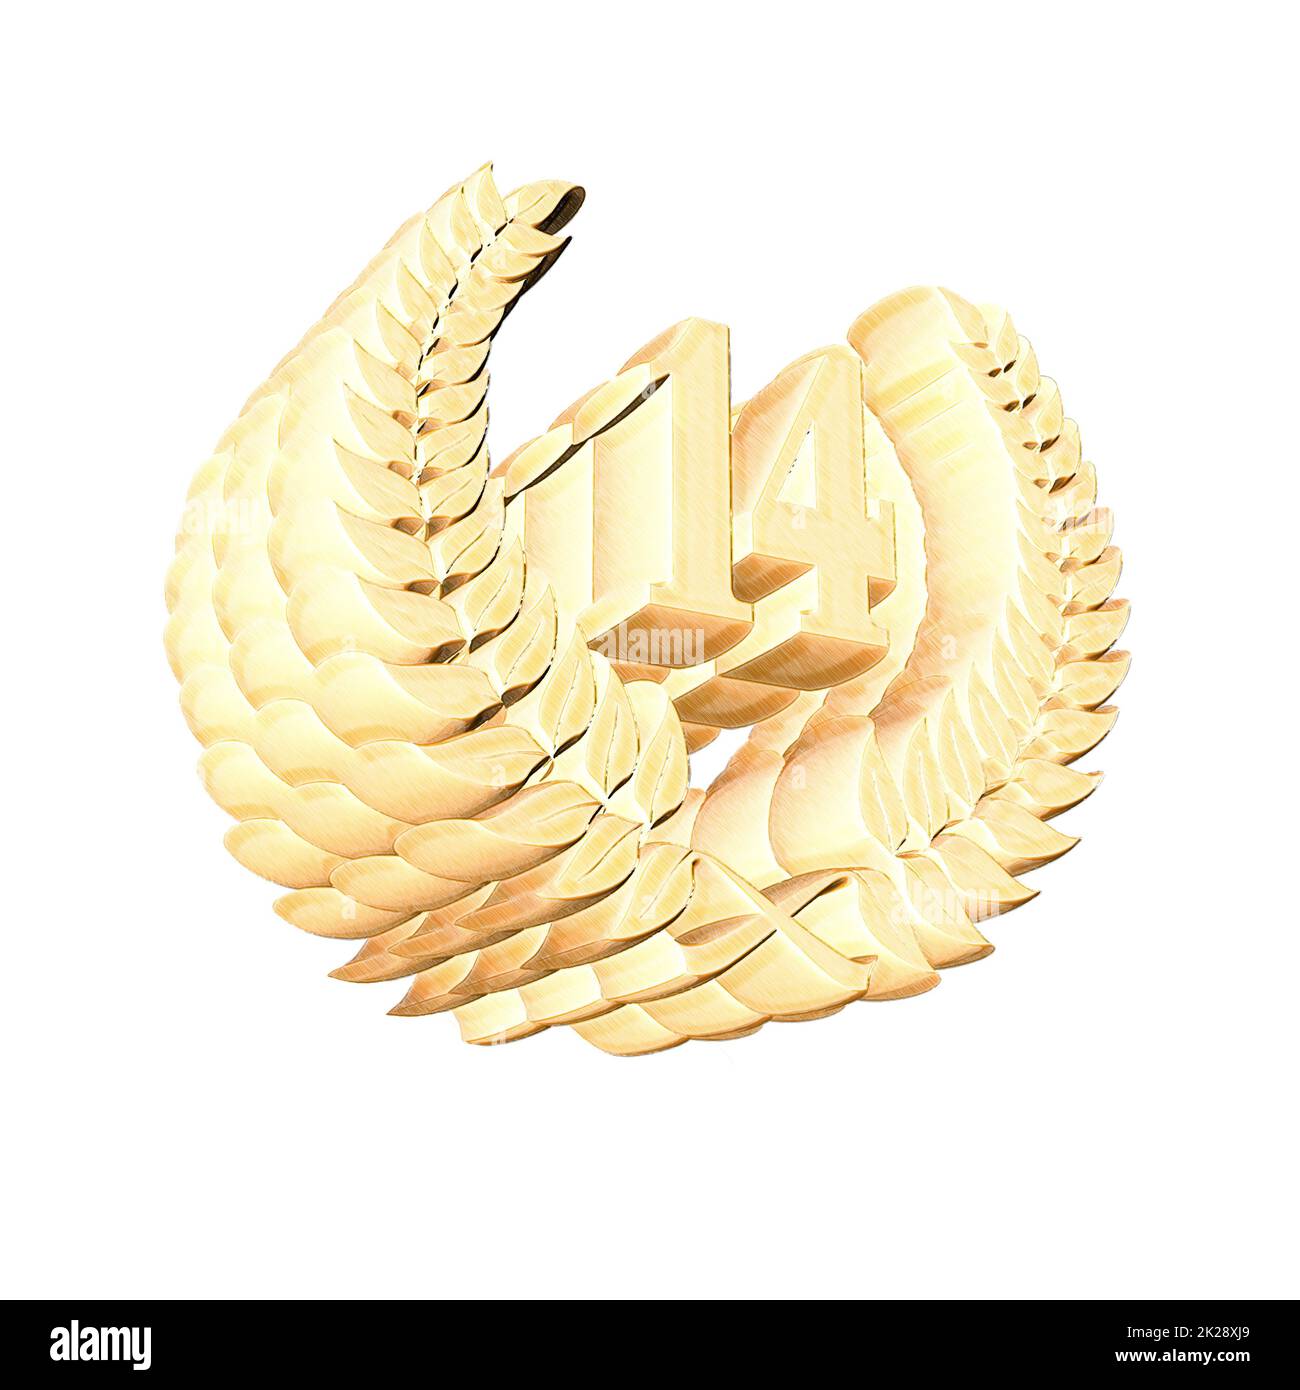 Number 14 with laurel wreath or honor wreath as a 3D-illustration, 3D-rendering Stock Photo